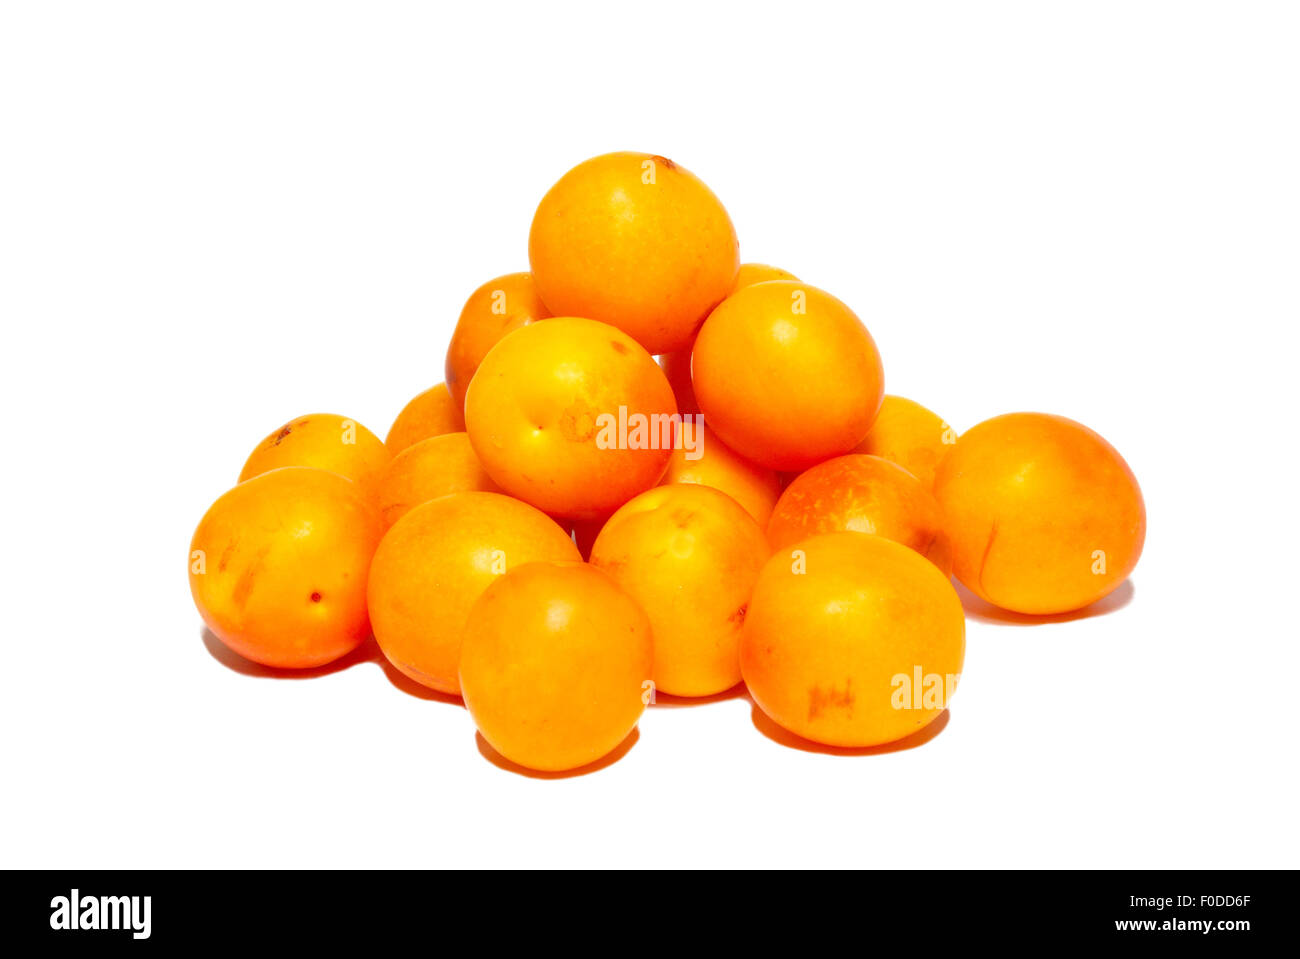 Pile of yellow fresh plums. Stock Photo